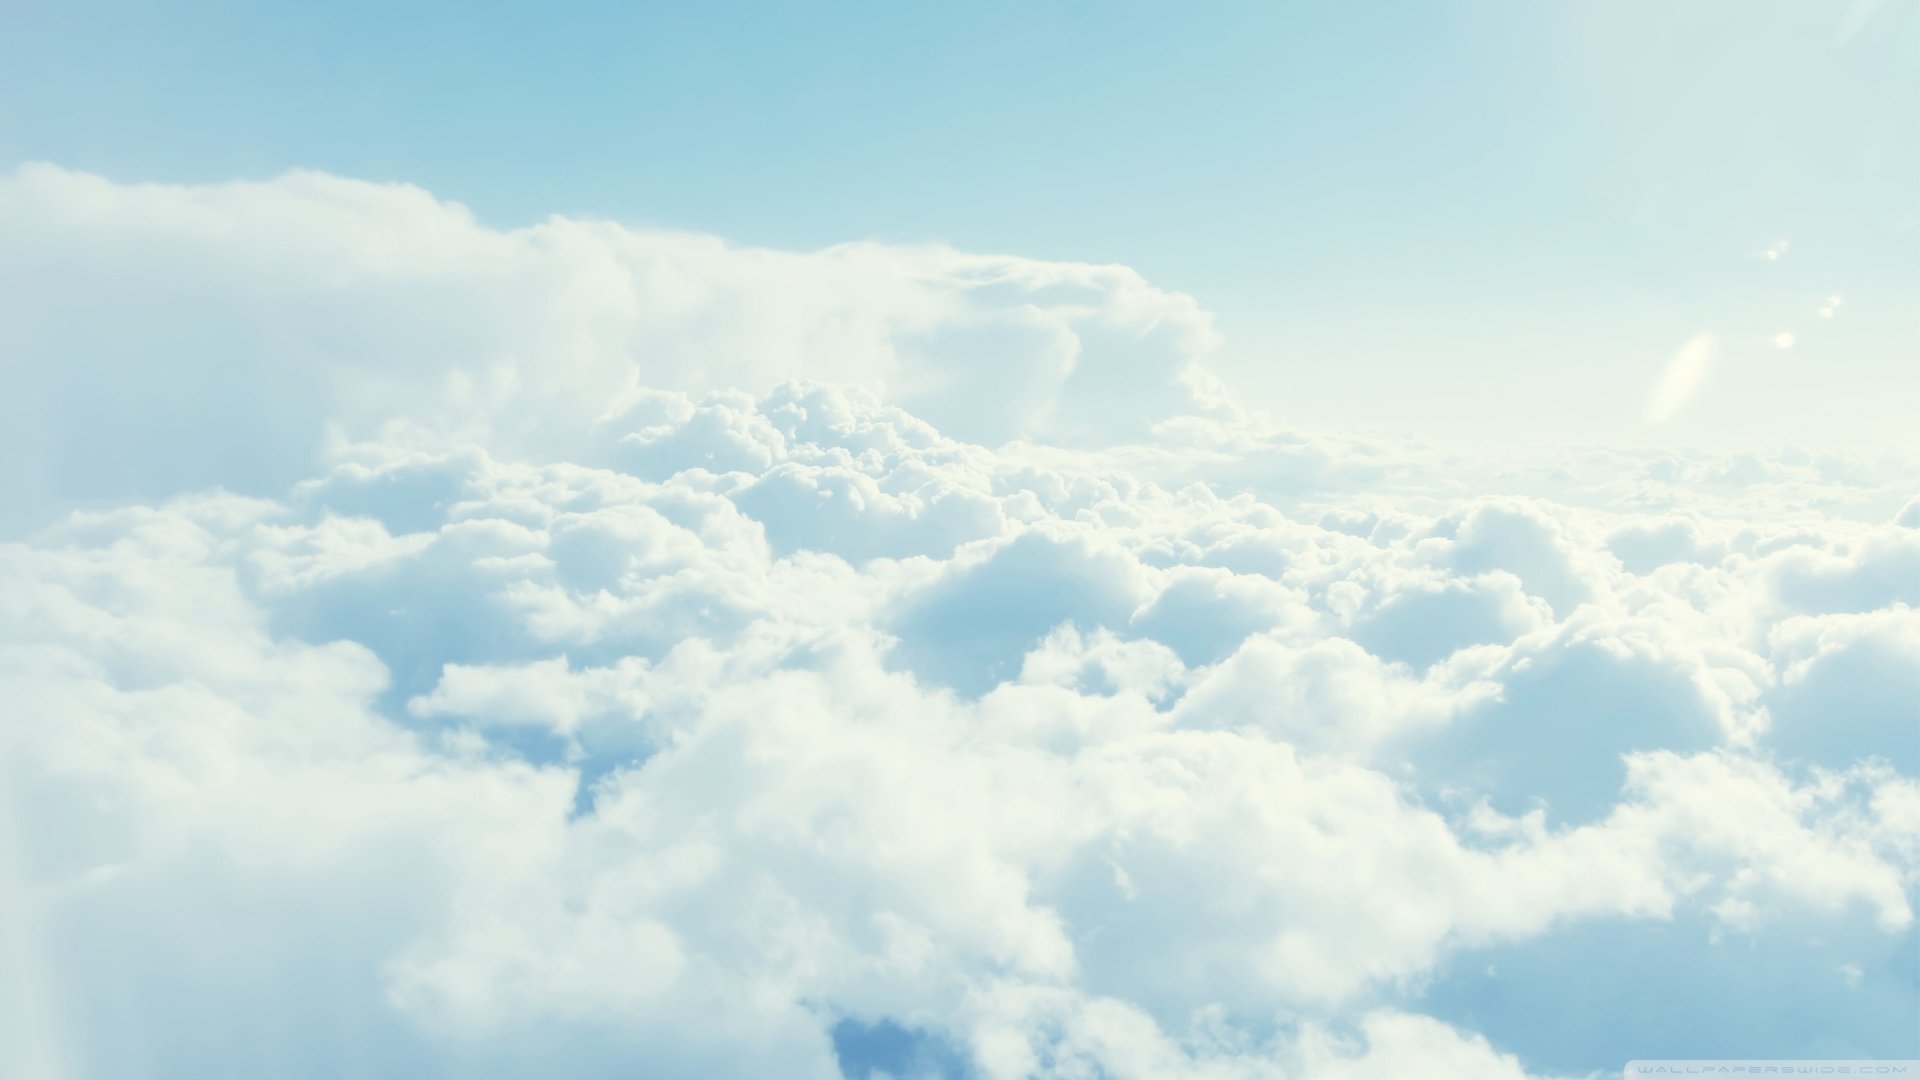 740+ Cloud HD Wallpapers and Backgrounds